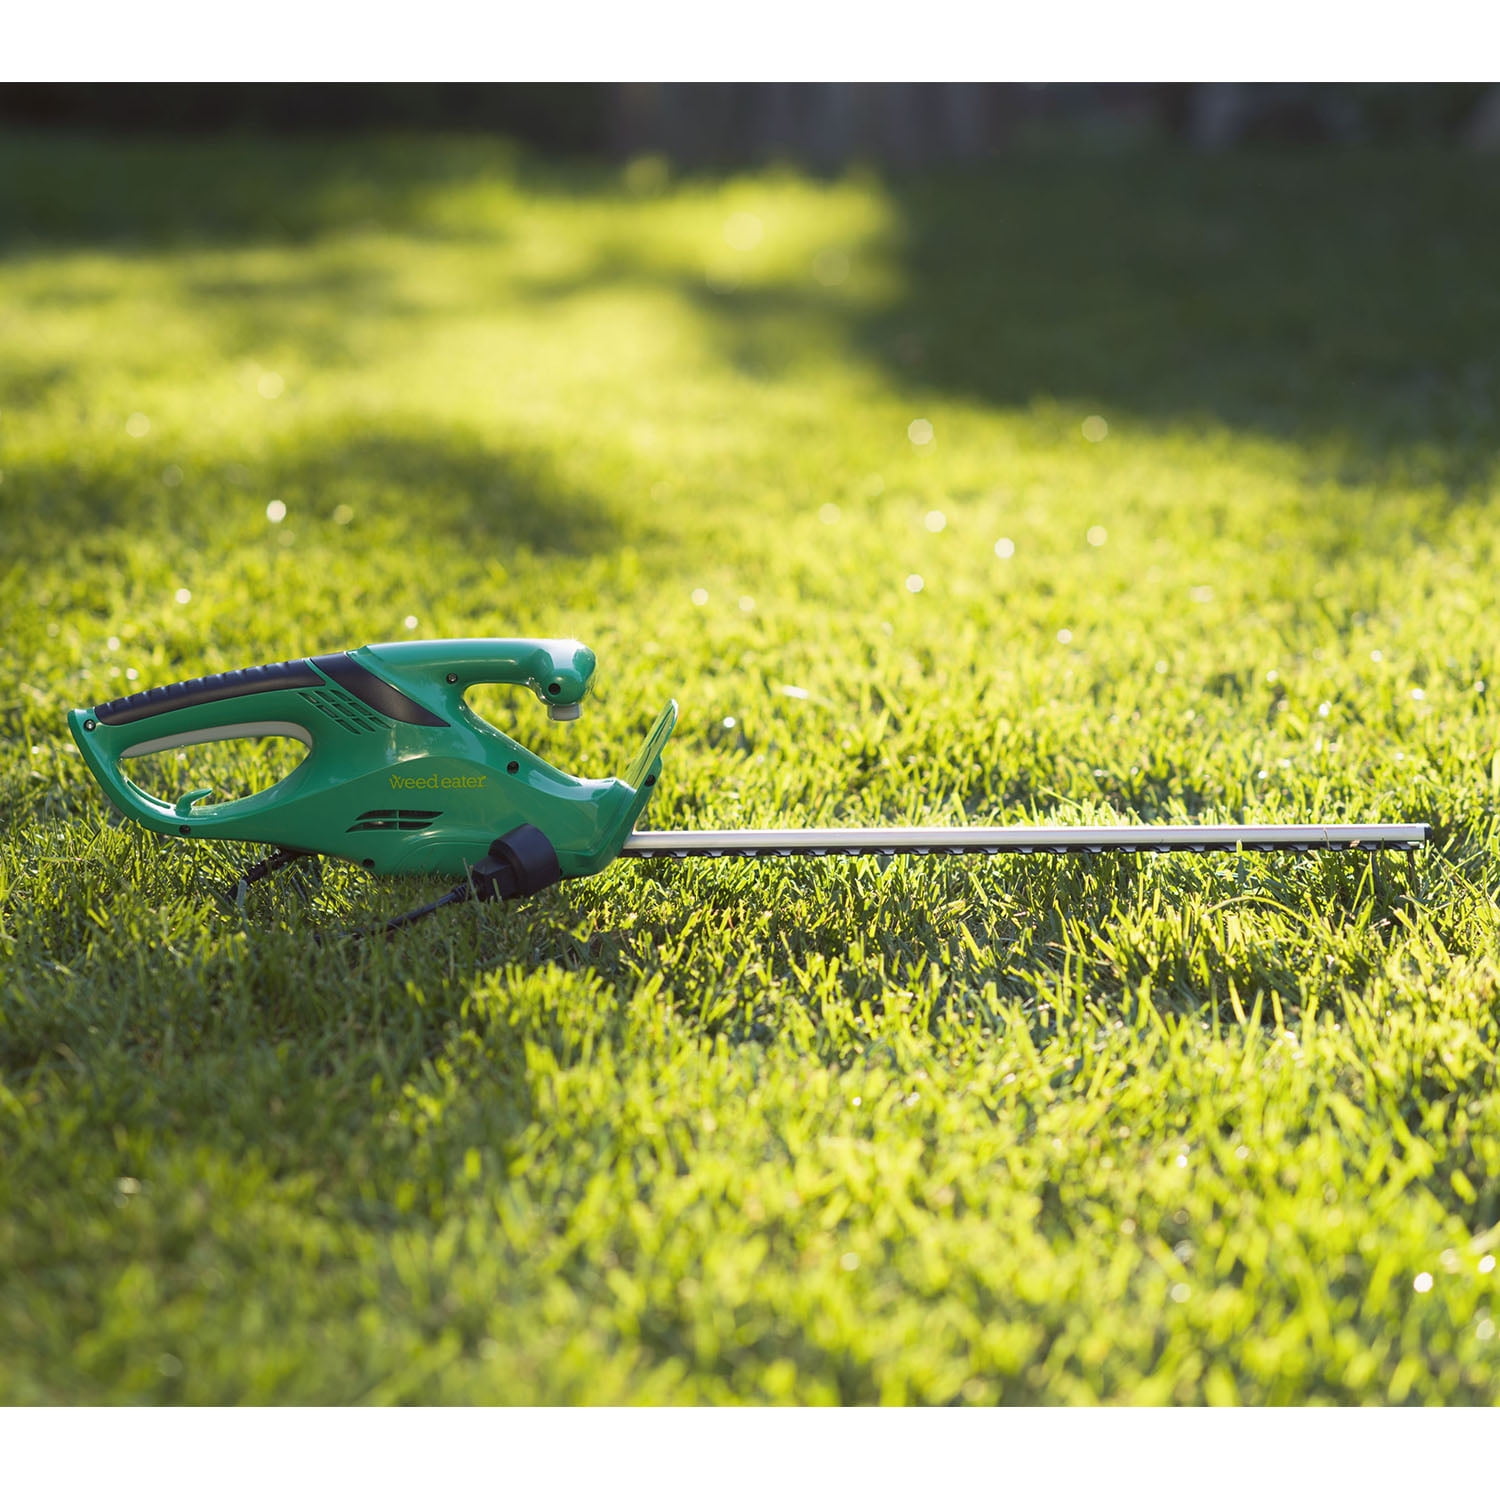 Home Garden Electric Hedge Trimmer – Pyle USA